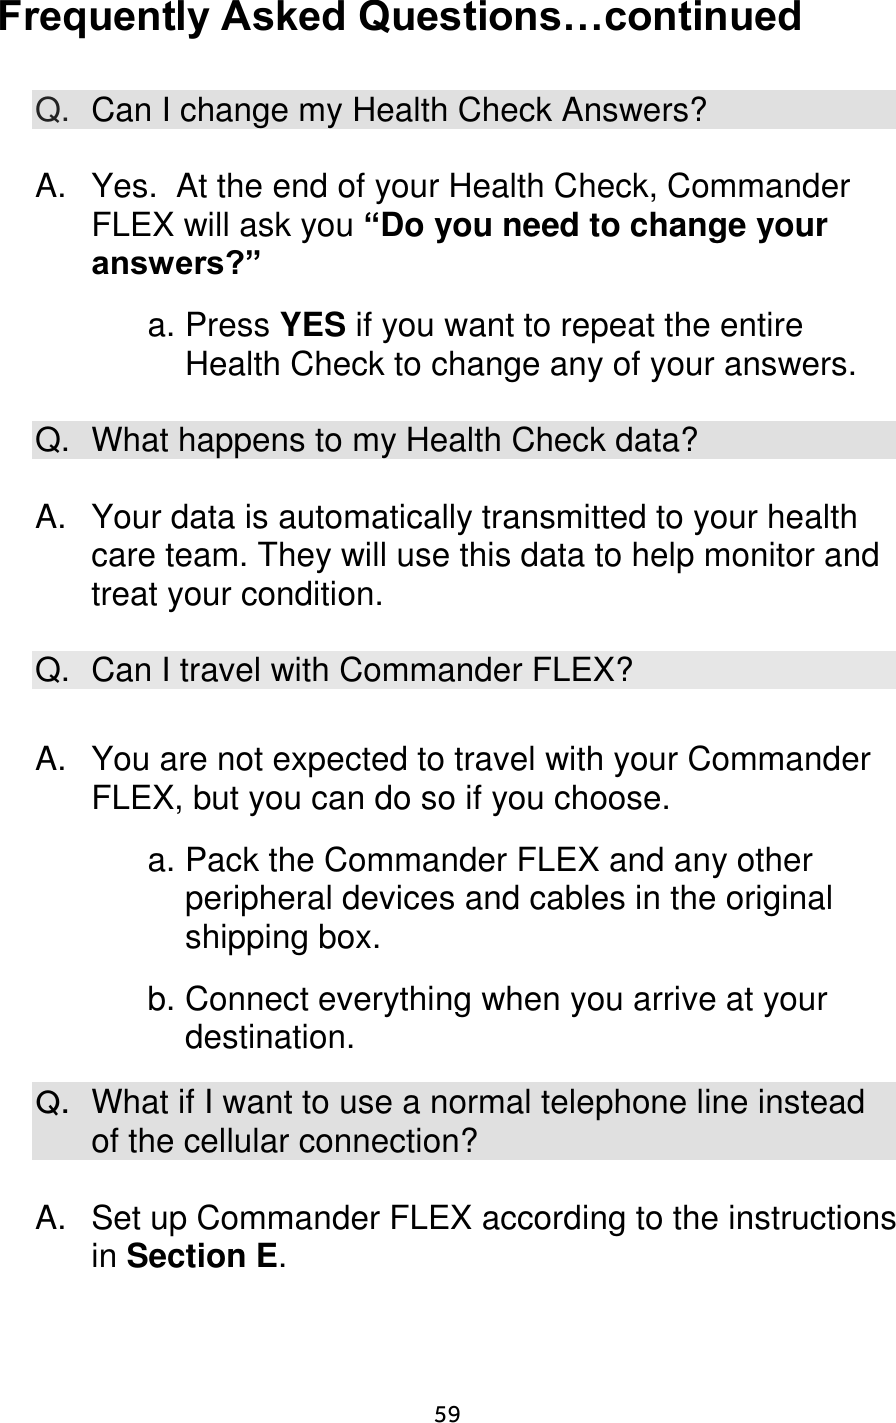                      59 Frequently Asked Questions…continued  Q. Can I change my Health Check Answers?  A.  Yes.  At the end of your Health Check, Commander FLEX will ask you “Do you need to change your answers?”  a. Press YES if you want to repeat the entire Health Check to change any of your answers.  Q.  What happens to my Health Check data?  A.  Your data is automatically transmitted to your health care team. They will use this data to help monitor and treat your condition.  Q. Can I travel with Commander FLEX?  A.  You are not expected to travel with your Commander FLEX, but you can do so if you choose.    a. Pack the Commander FLEX and any other peripheral devices and cables in the original shipping box.    b. Connect everything when you arrive at your destination.  Q.  What if I want to use a normal telephone line instead of the cellular connection?  A.  Set up Commander FLEX according to the instructions in Section E. 